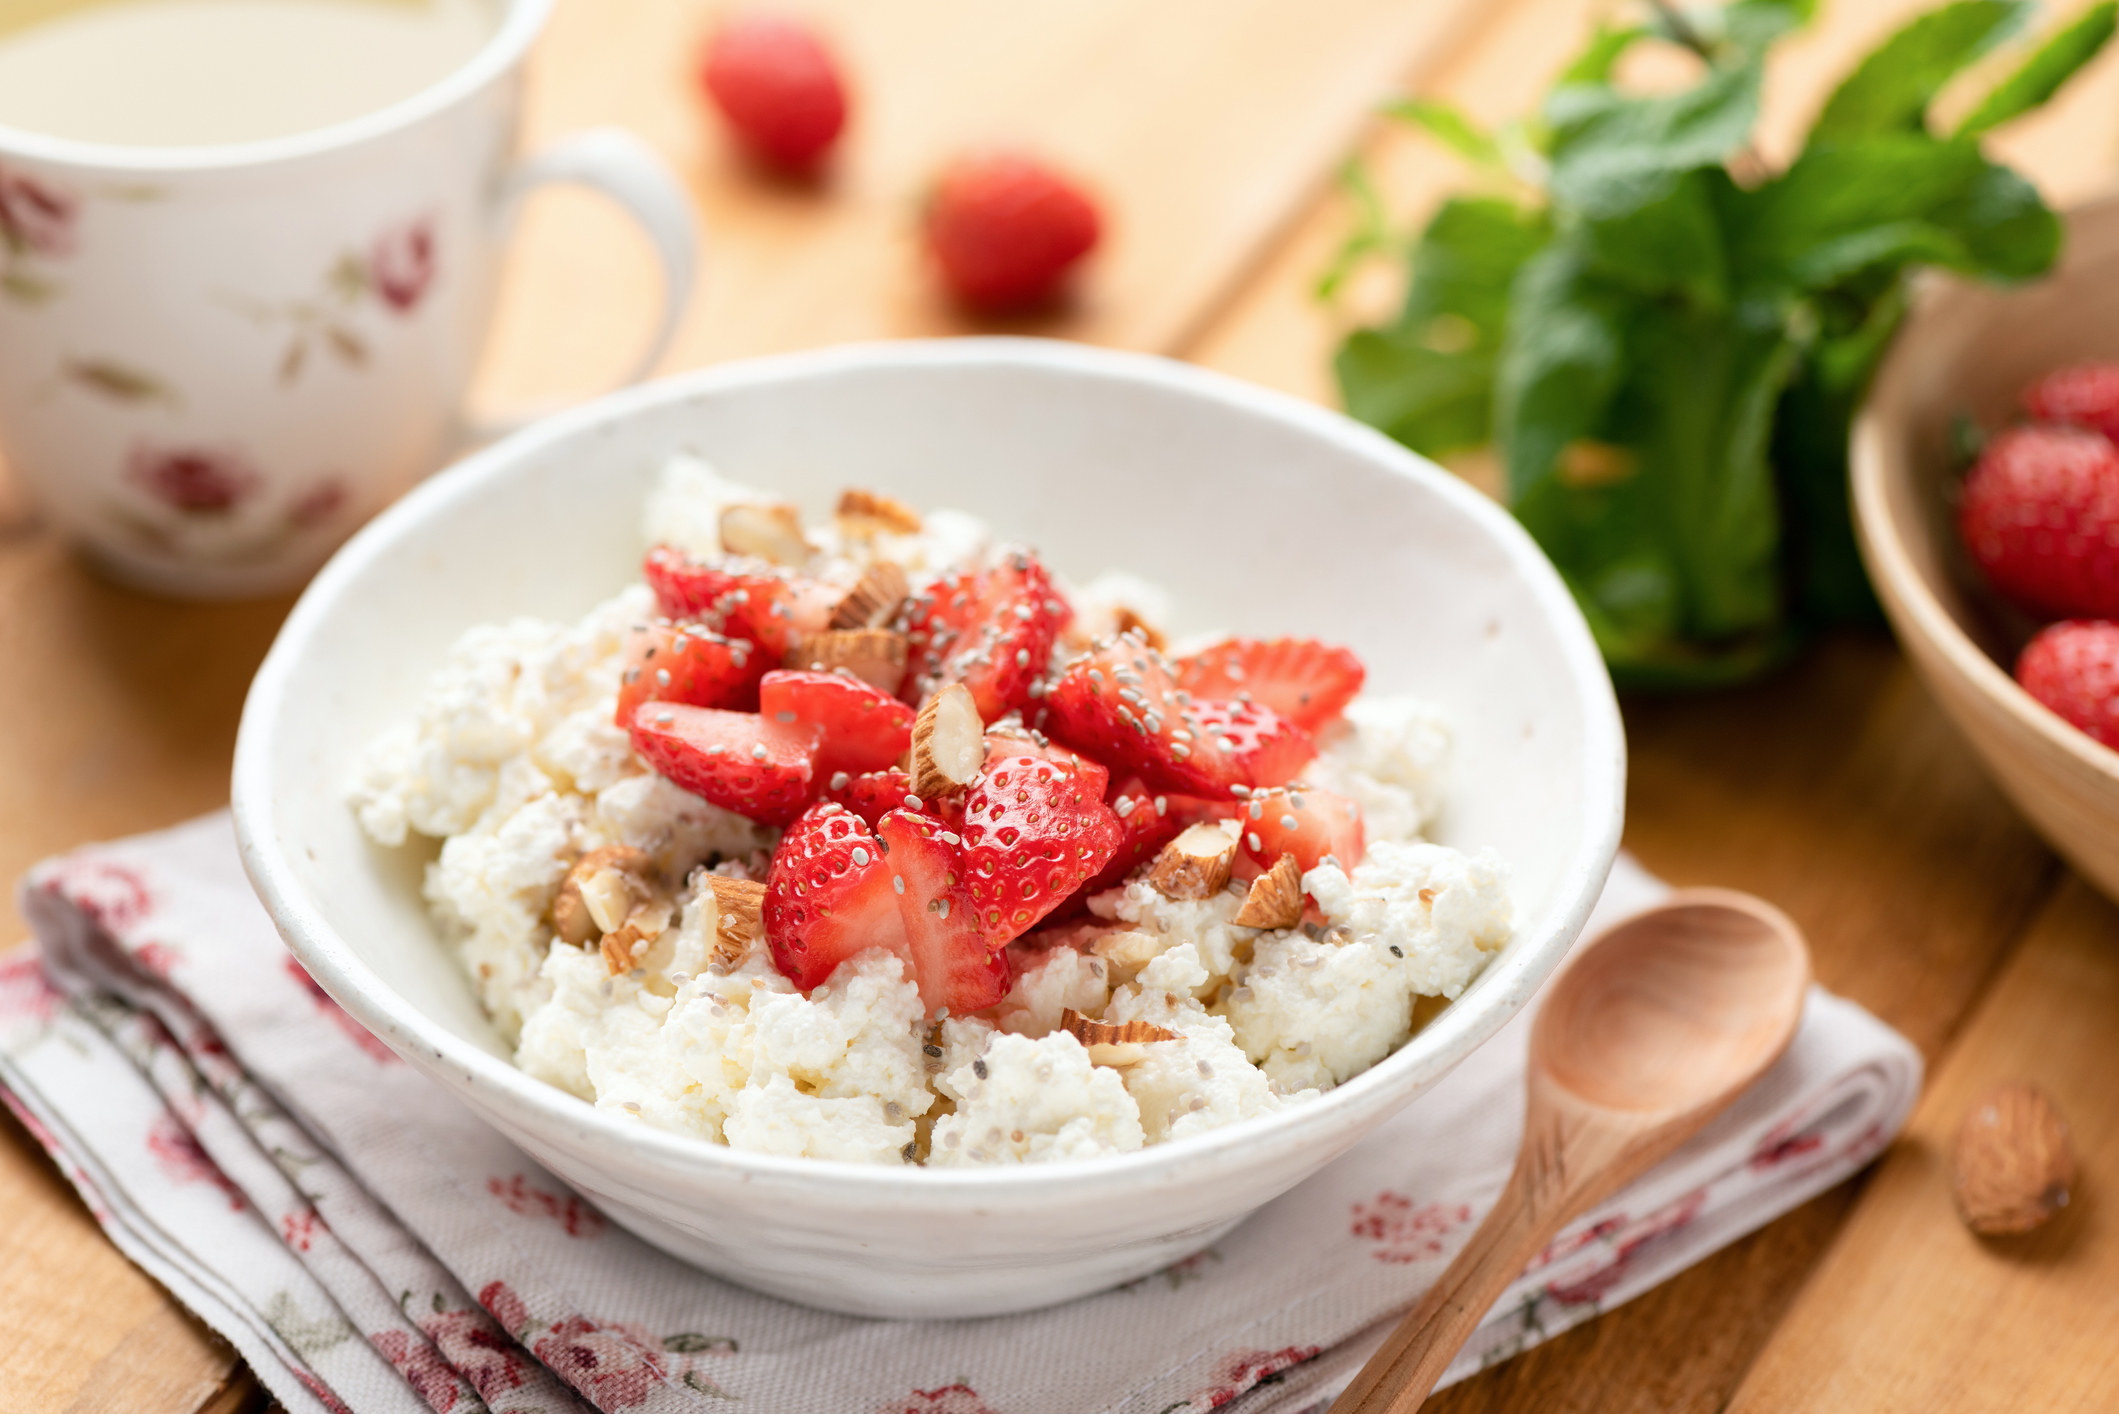 Cottage cheese with strawberries.